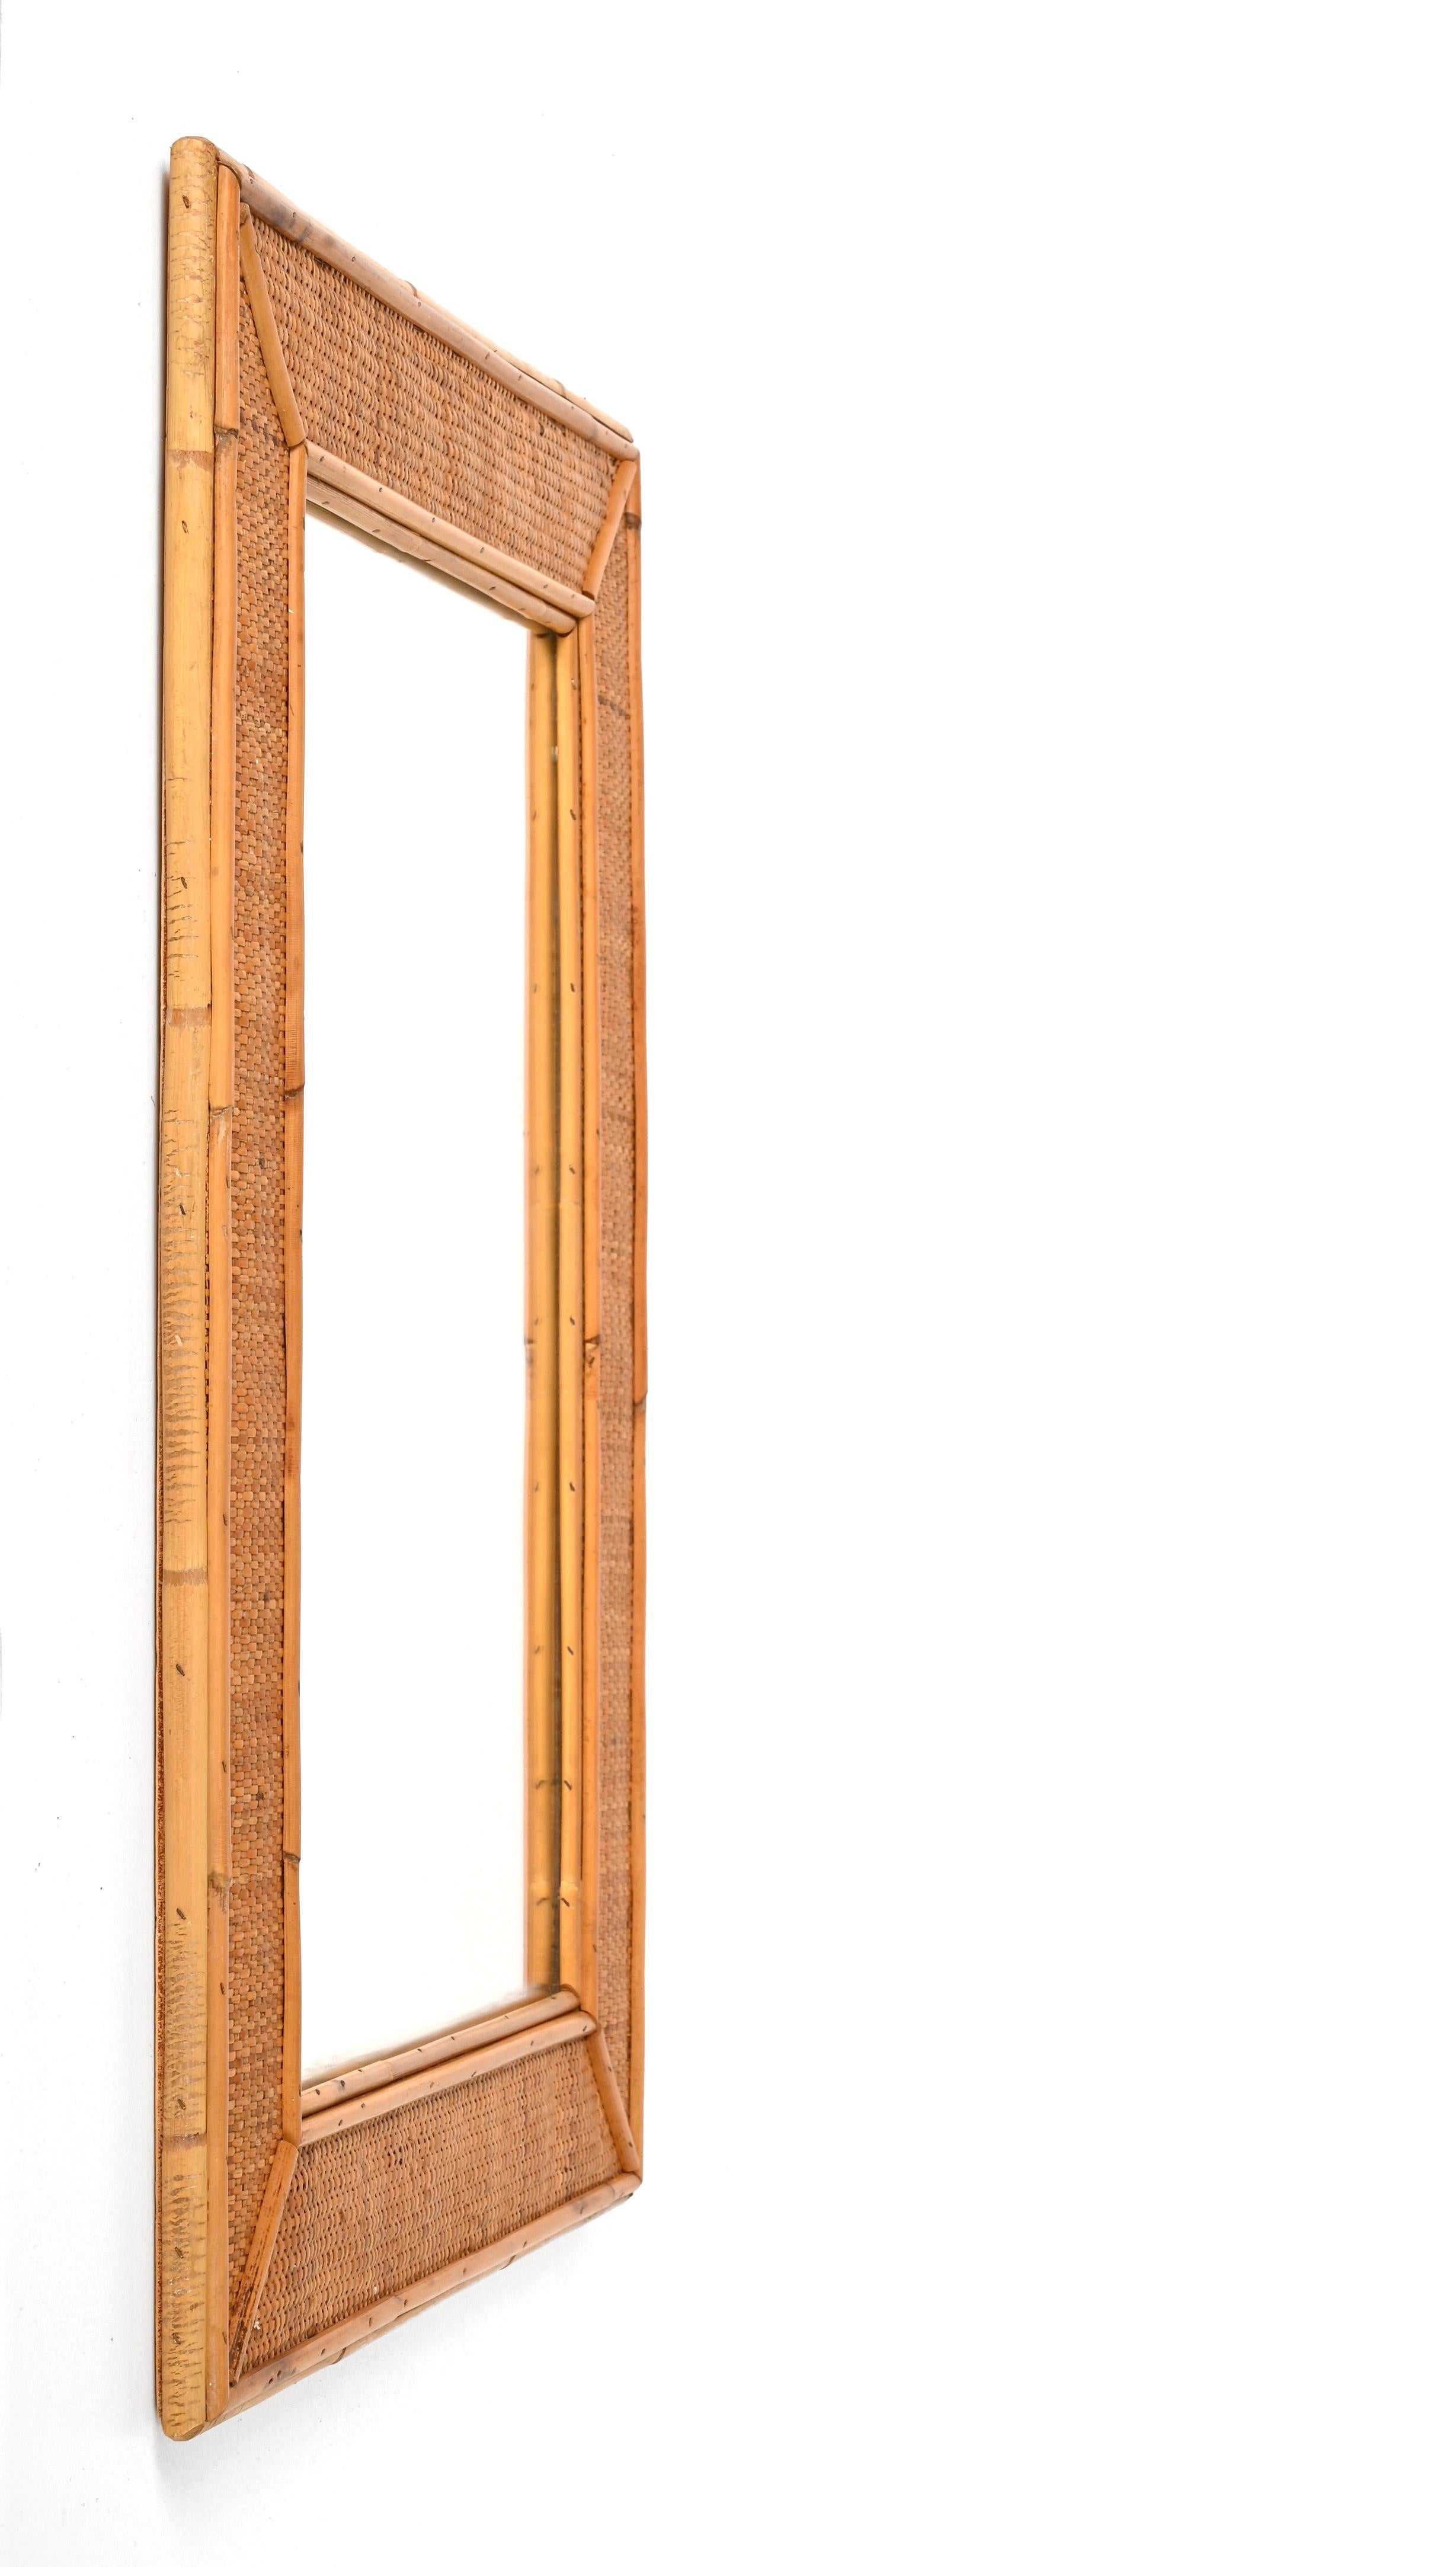 Spectacular midcentury rectangular bamboo and woven wicker mirror. This outstanding item was produced in Italy during the 1970s.

This piece is incredible thanks to its complex frame: it has an internal part made of small bamboo canes, the central